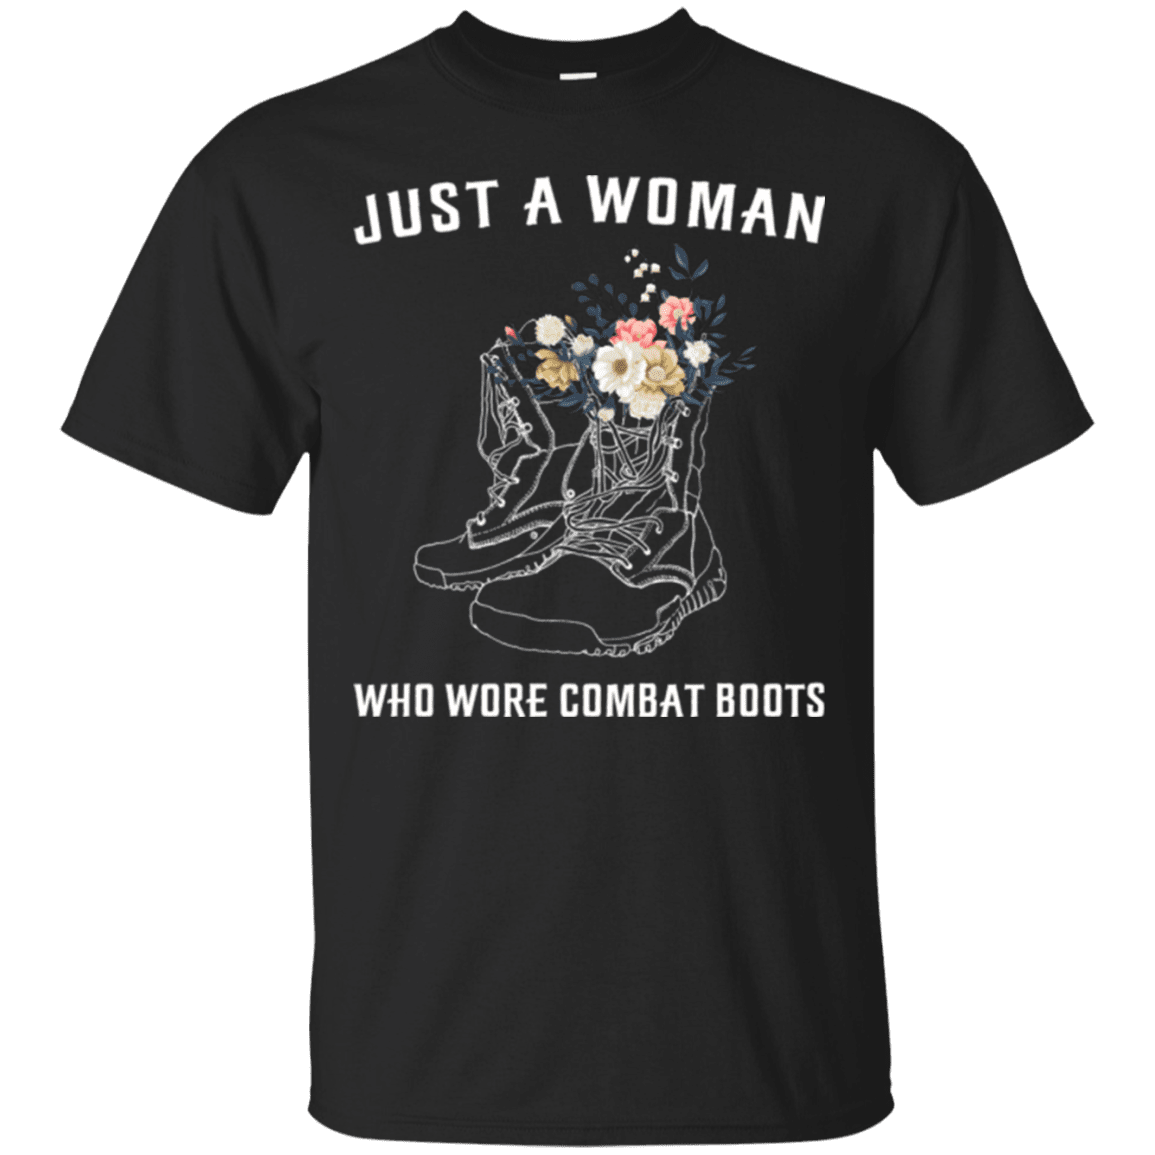 Military T-Shirt "JUST A WOMAN WHO WORE COMBAT BOOTS"-TShirt-General-Veterans Nation